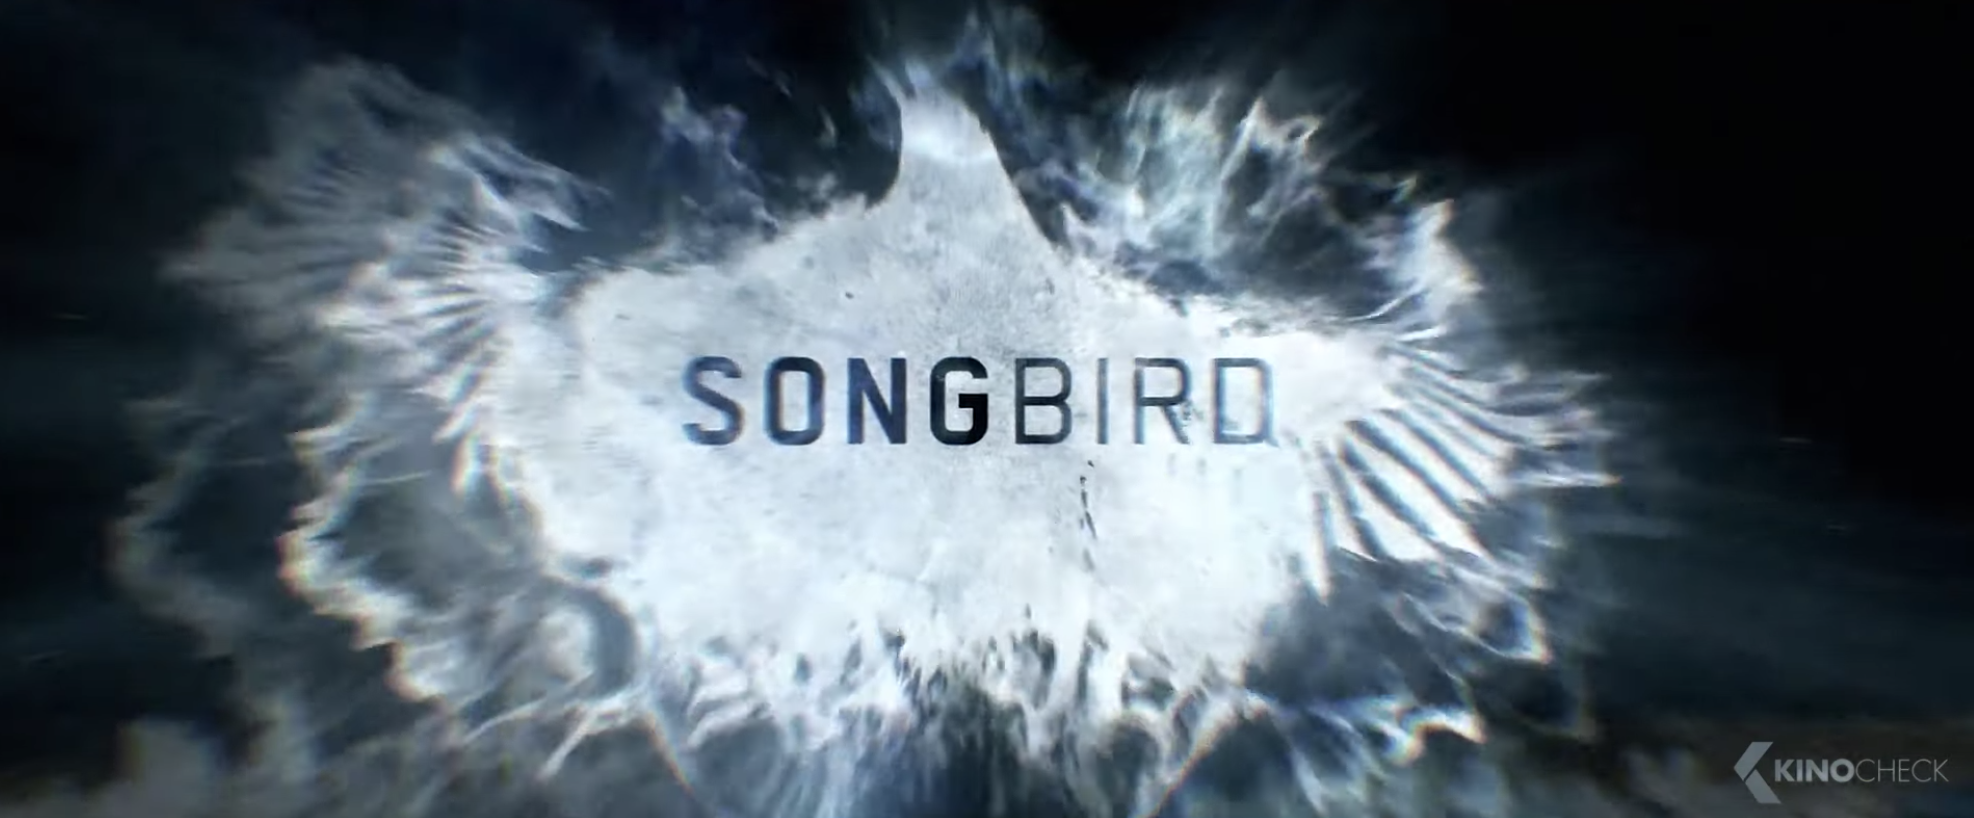 Michael Bay Produced Songbird A Movie About Covid